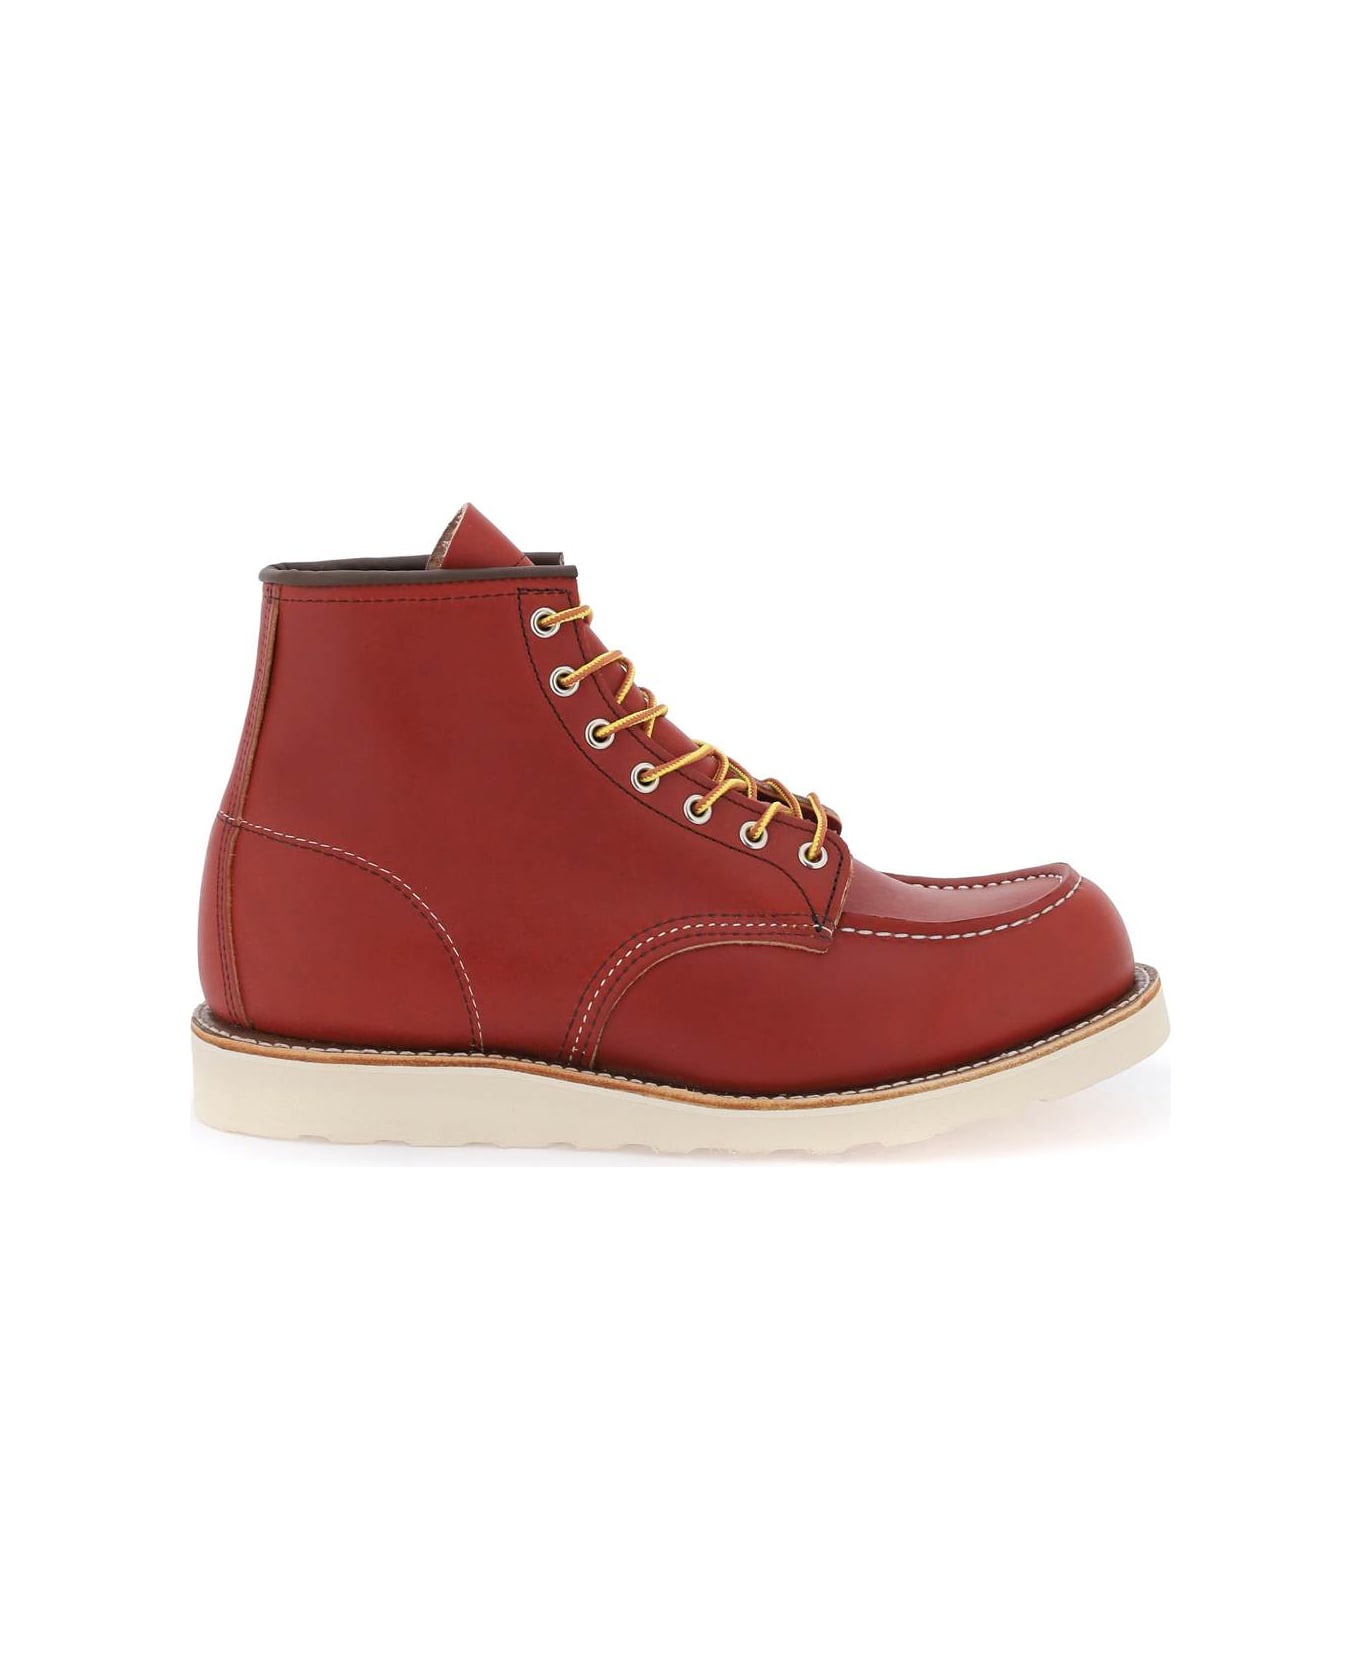 Red Wing Classic Moc Ankle Boots - ORO RUSSET (Red)